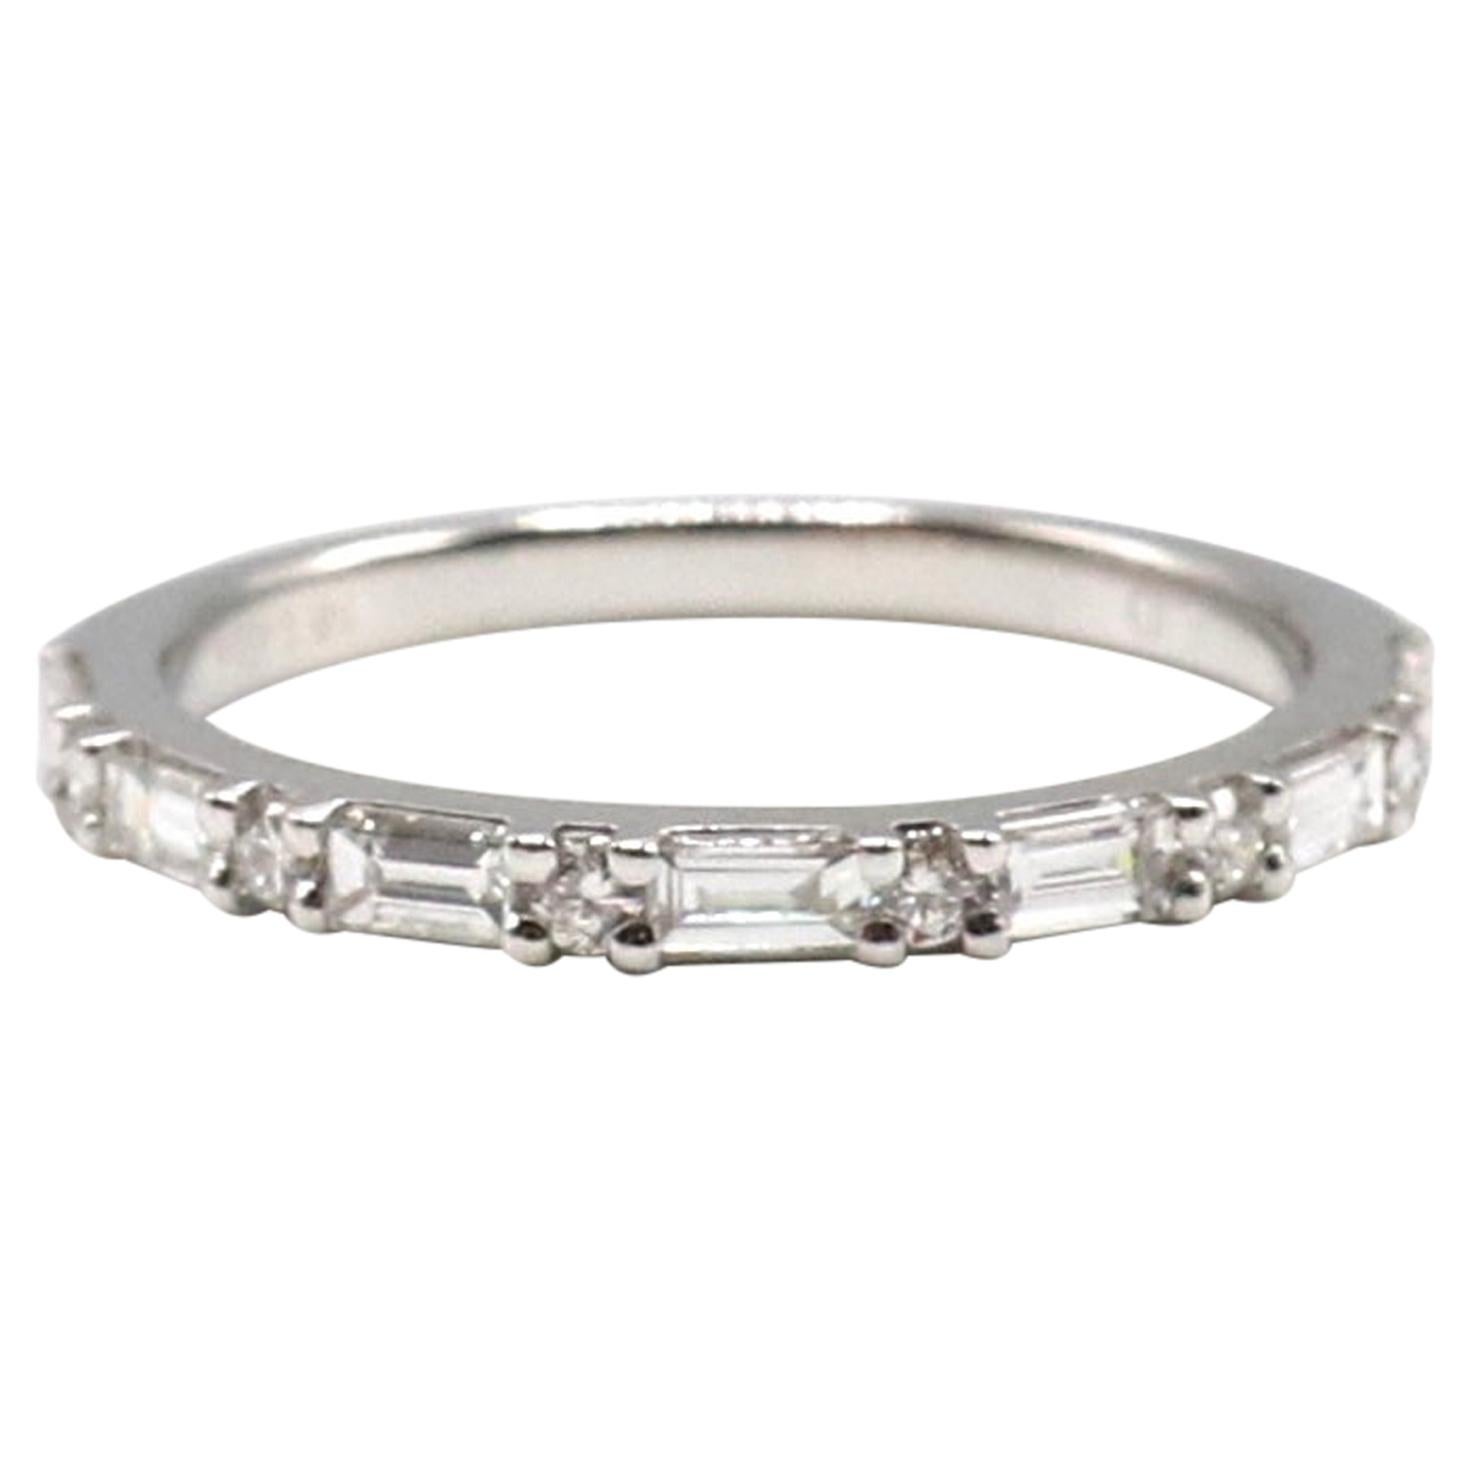 14K White Gold 0.45 Carat Round & Baguette Diamond Wedding Band Stackable Ring